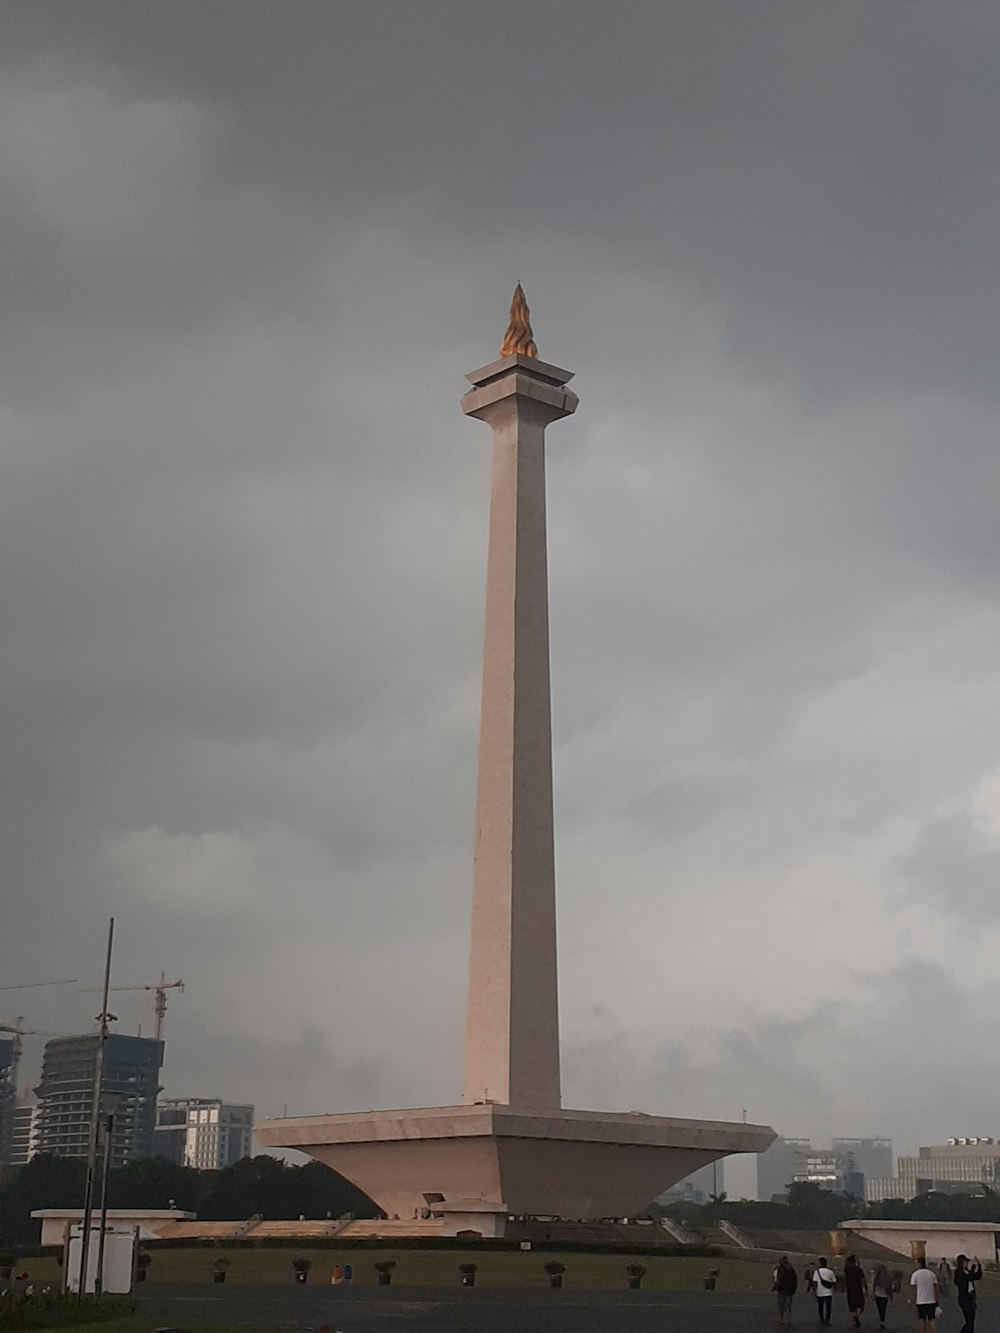 a tall obelisk in the middle of a city